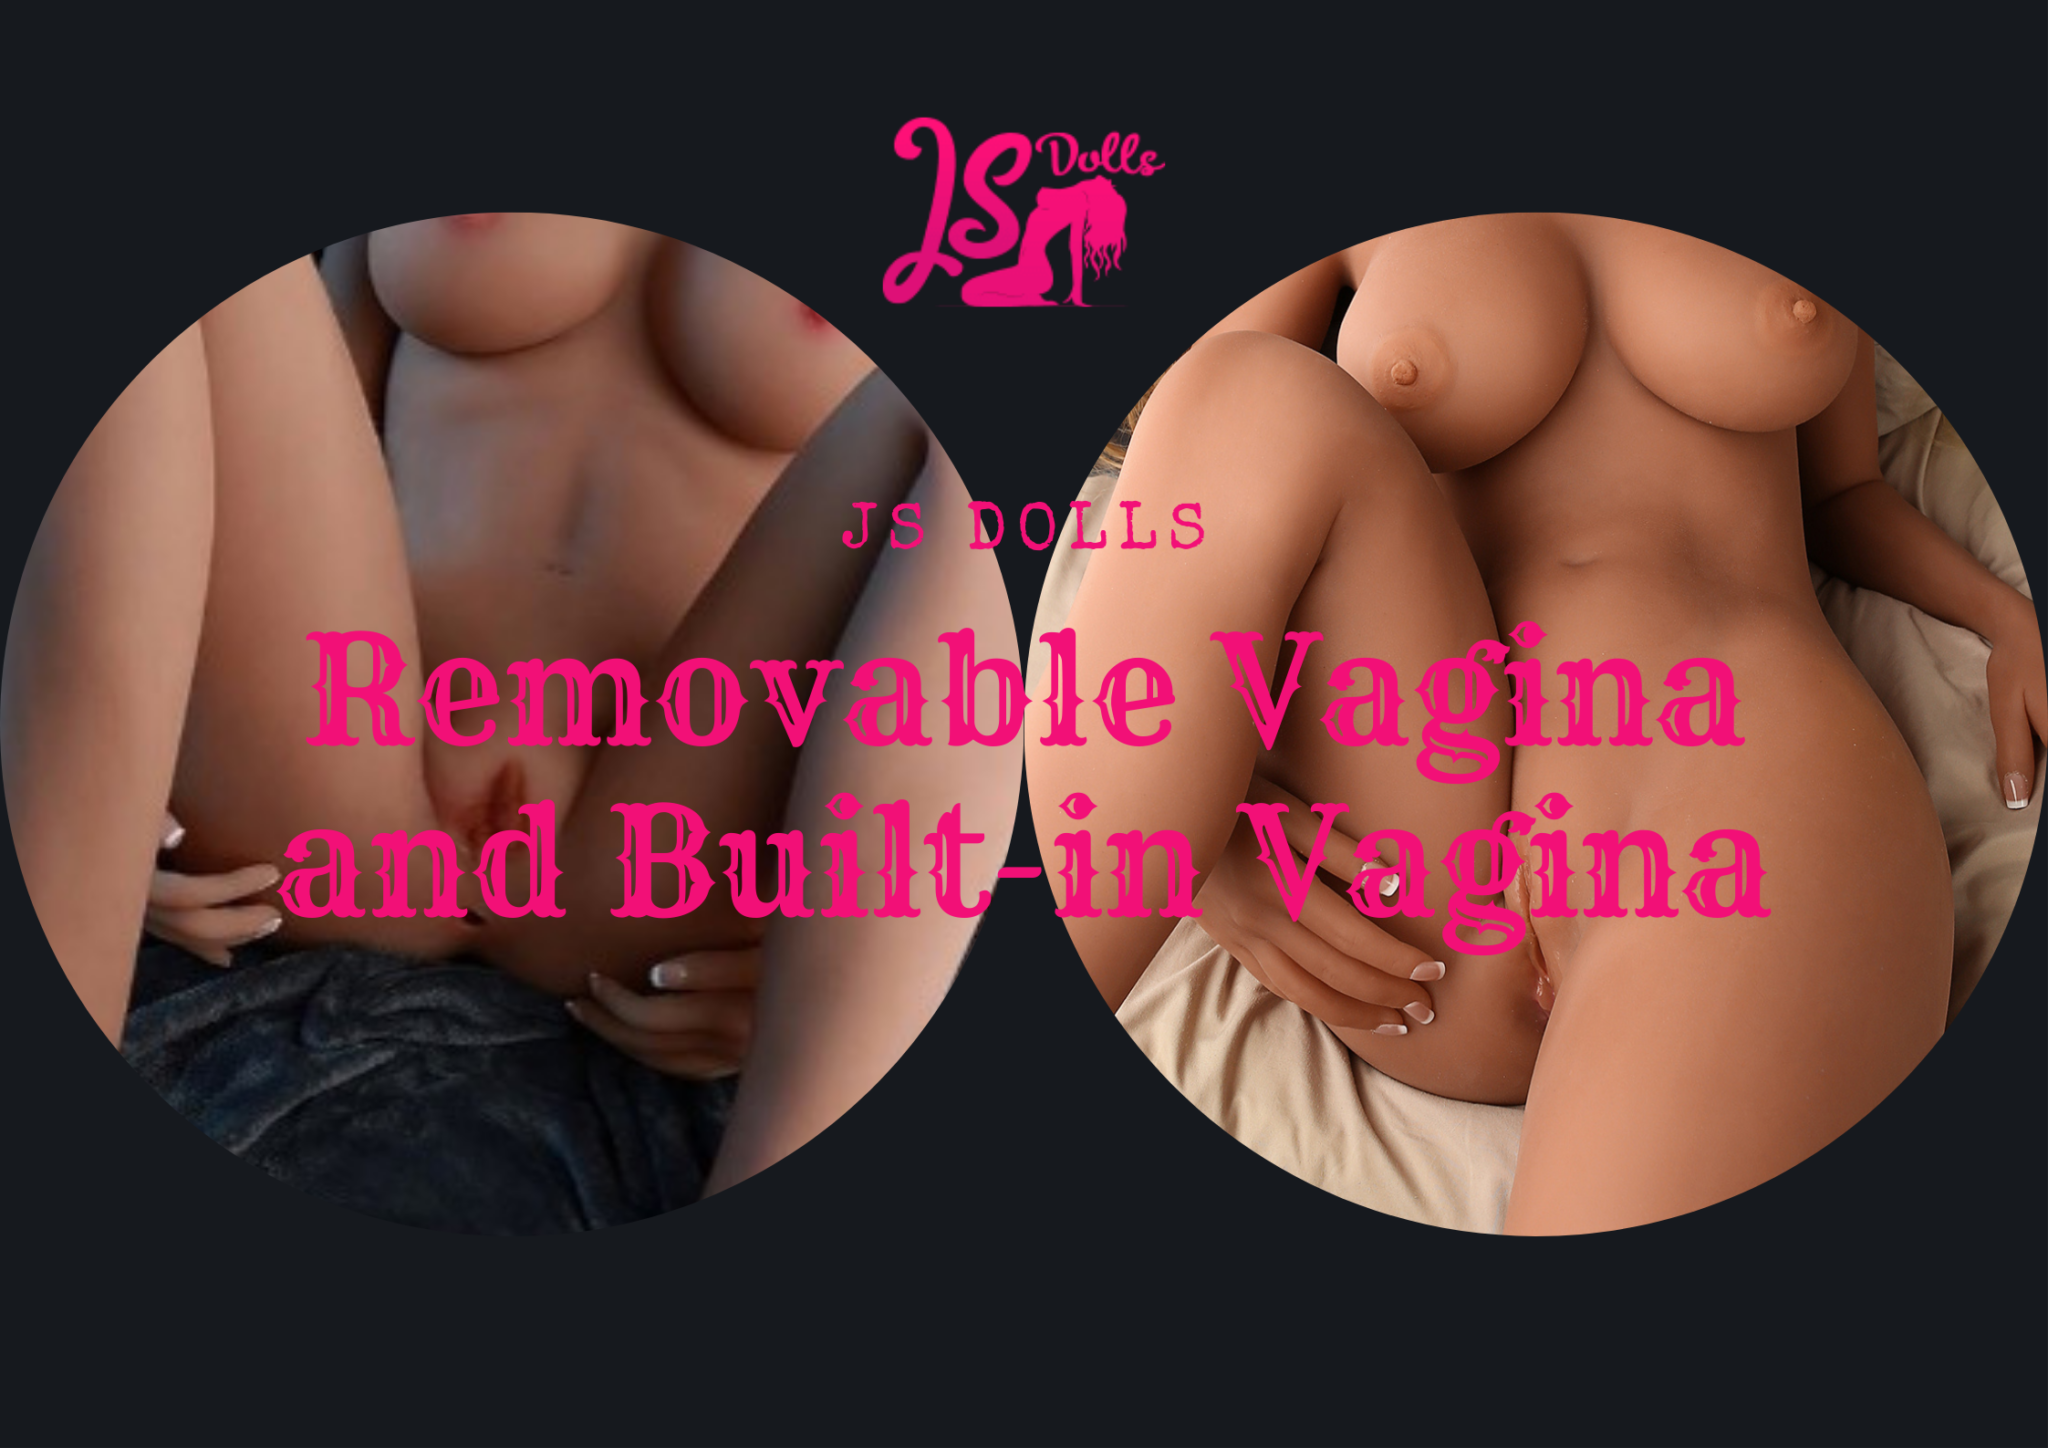 Removable Vagina and Built-in Vagina